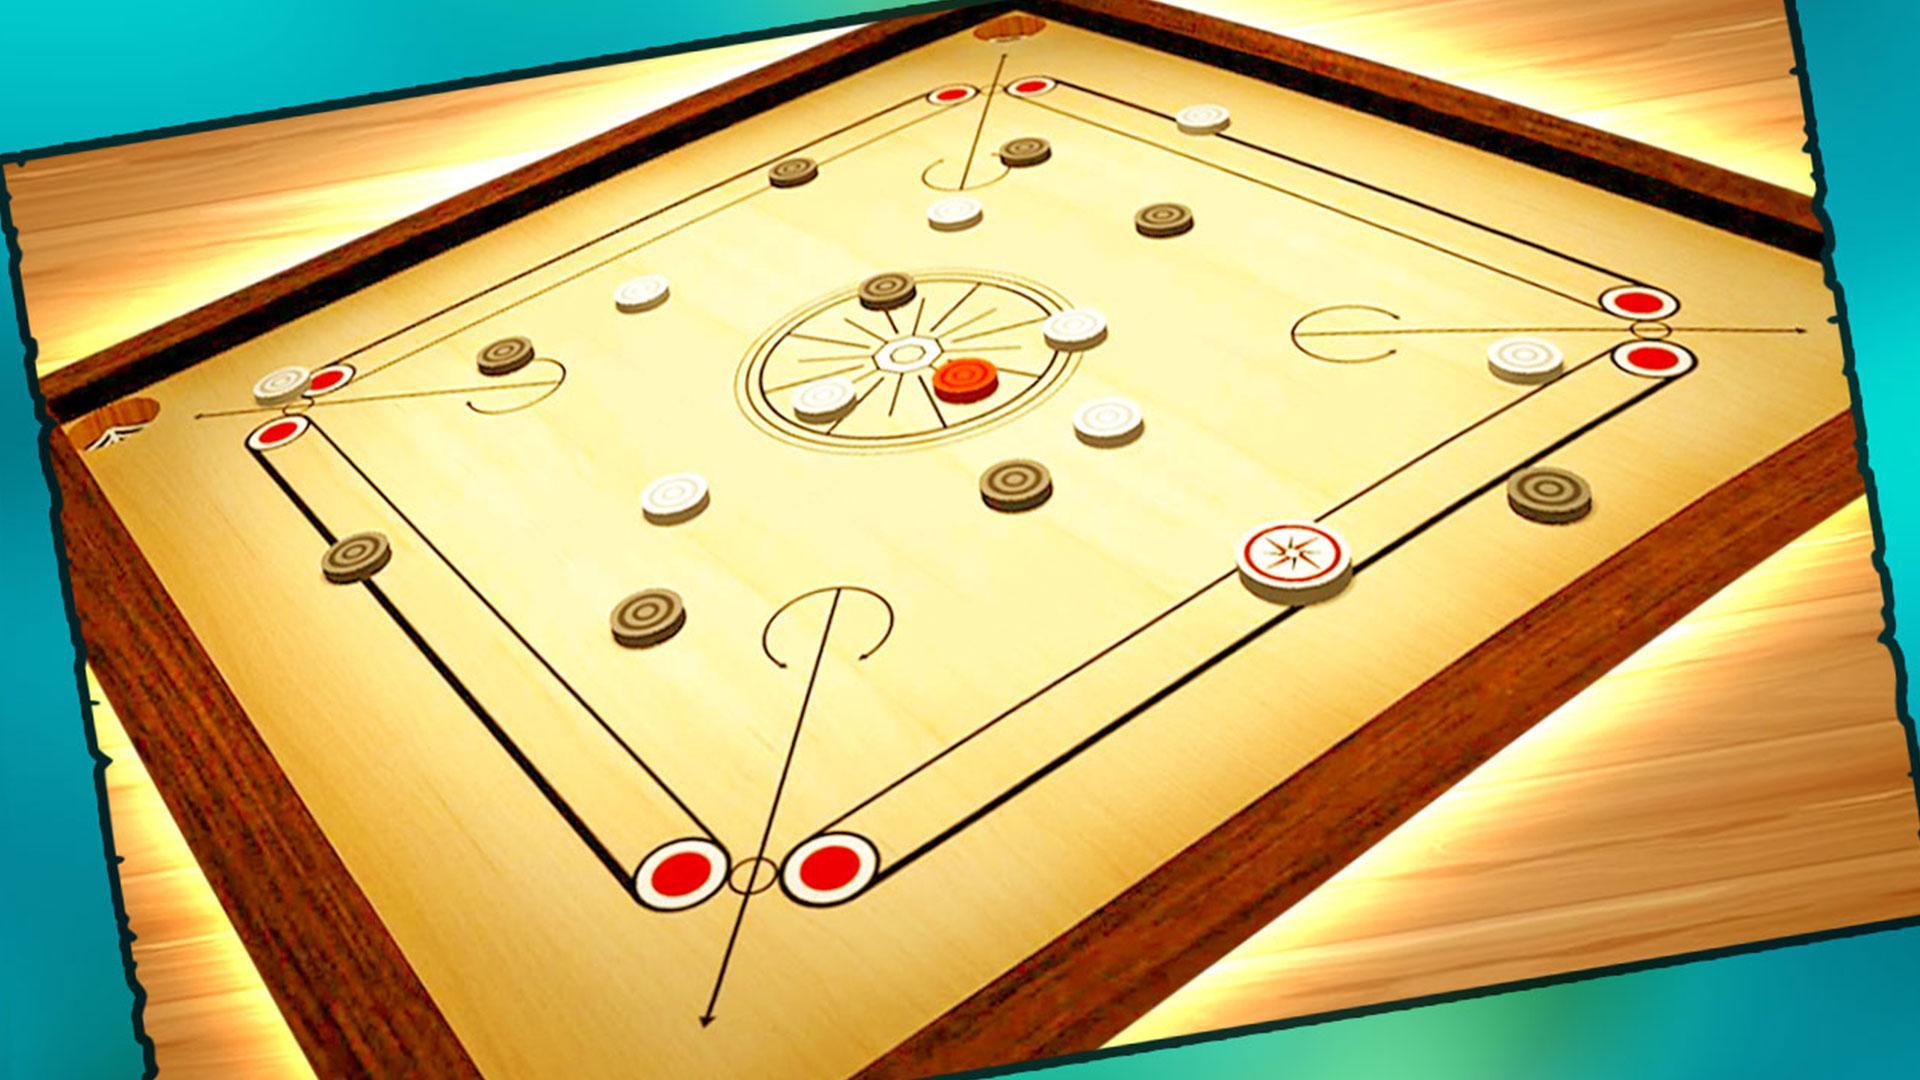 carrom game online download